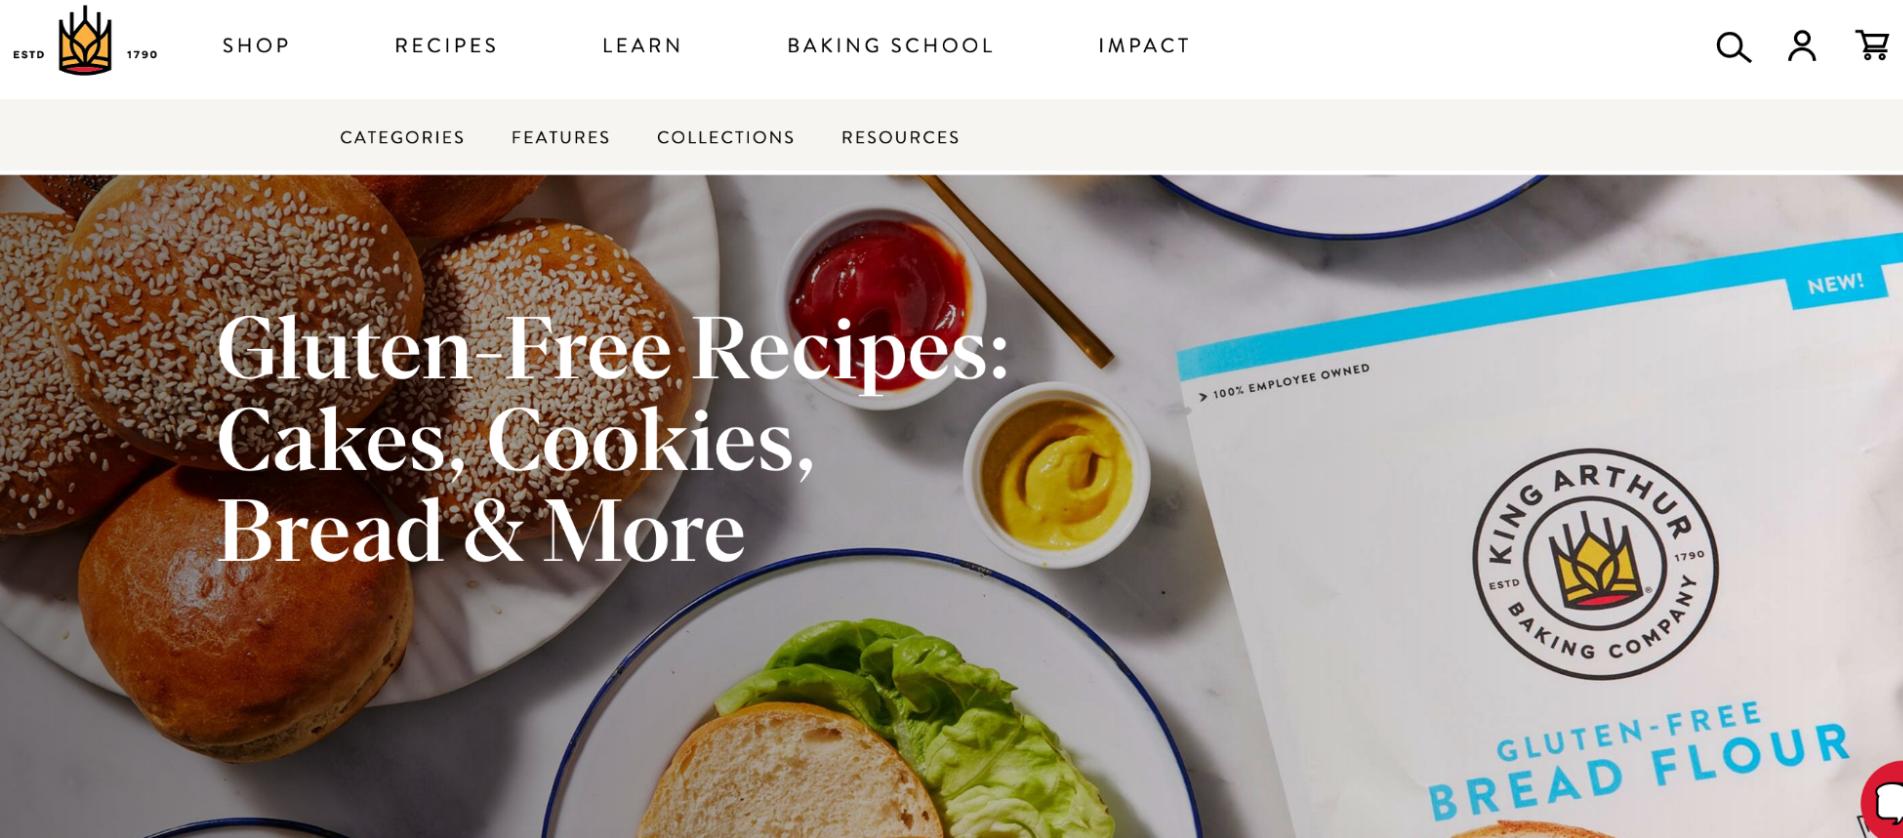 Image of King Arthur Baking's website showcasing bread flour and gluten-free recipes.